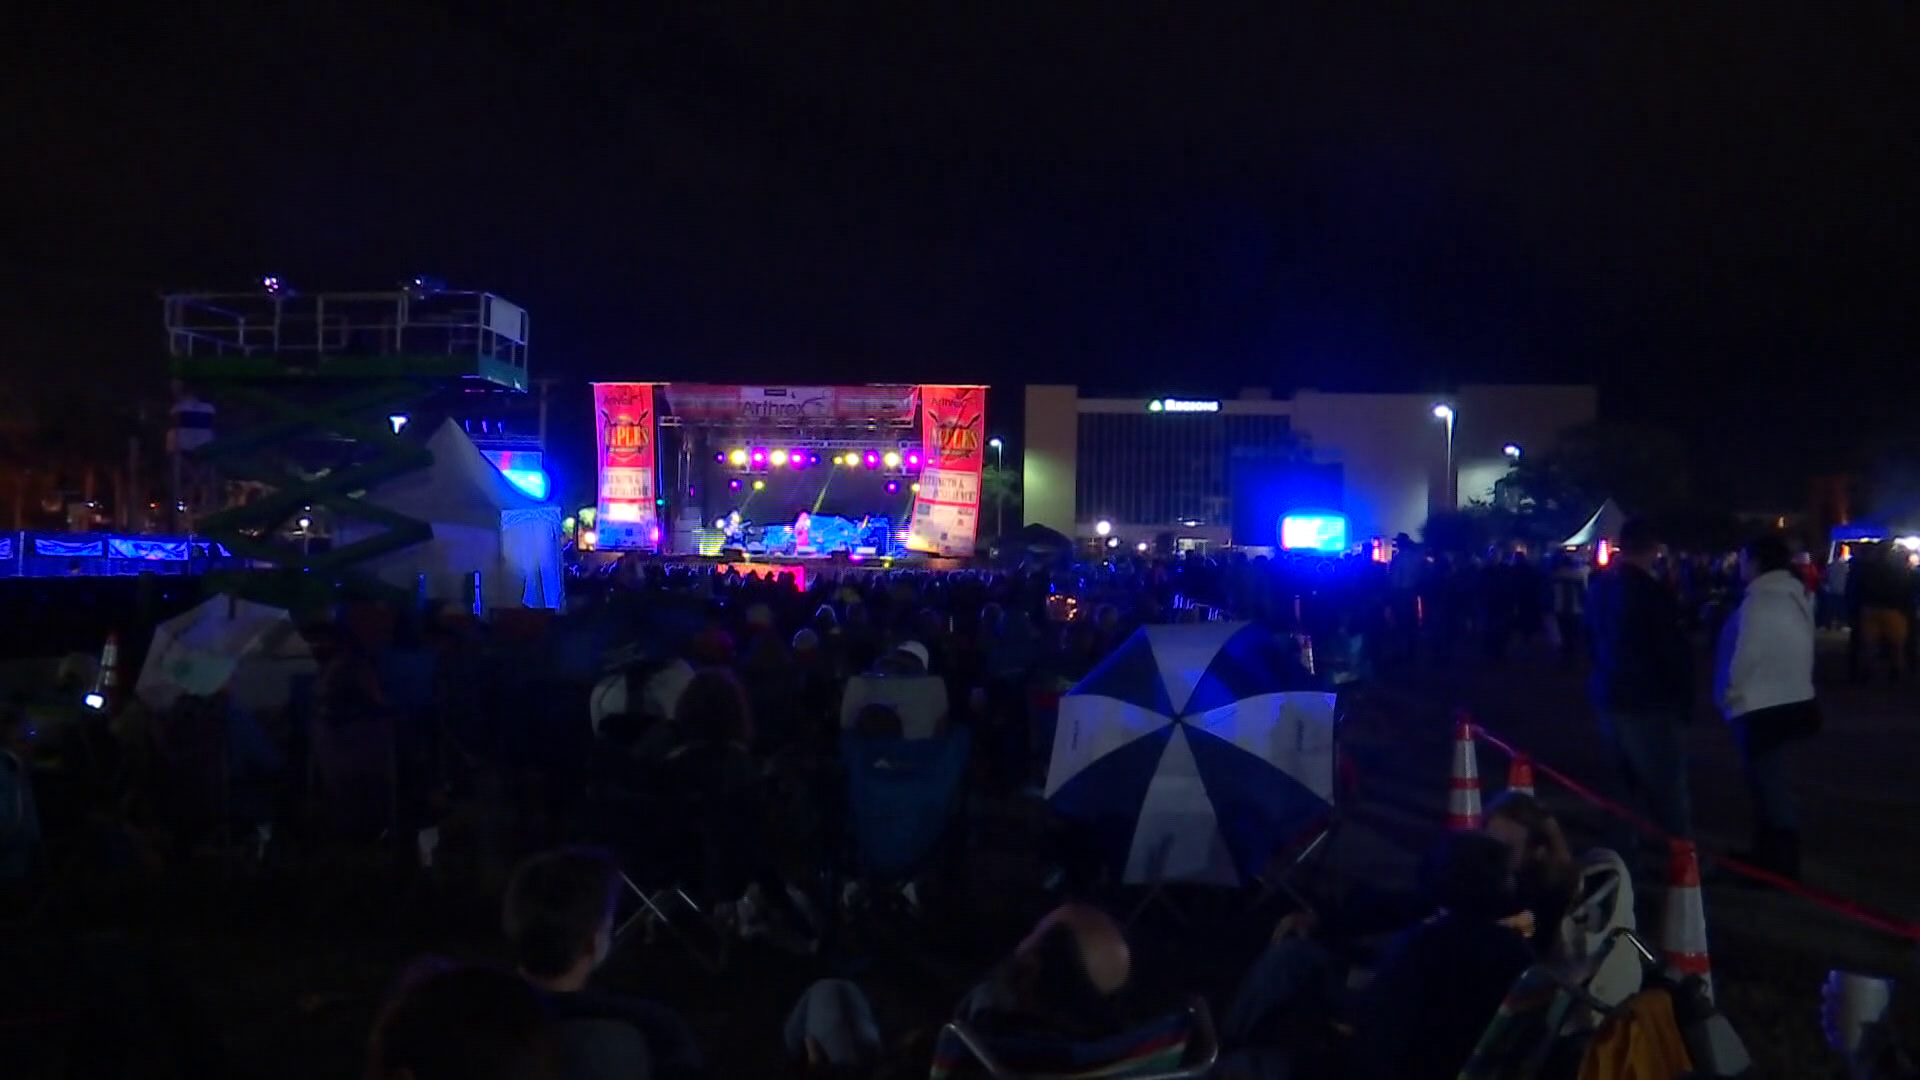 collier-county-may-limit-outdoor-concerts-after-noise-complaints